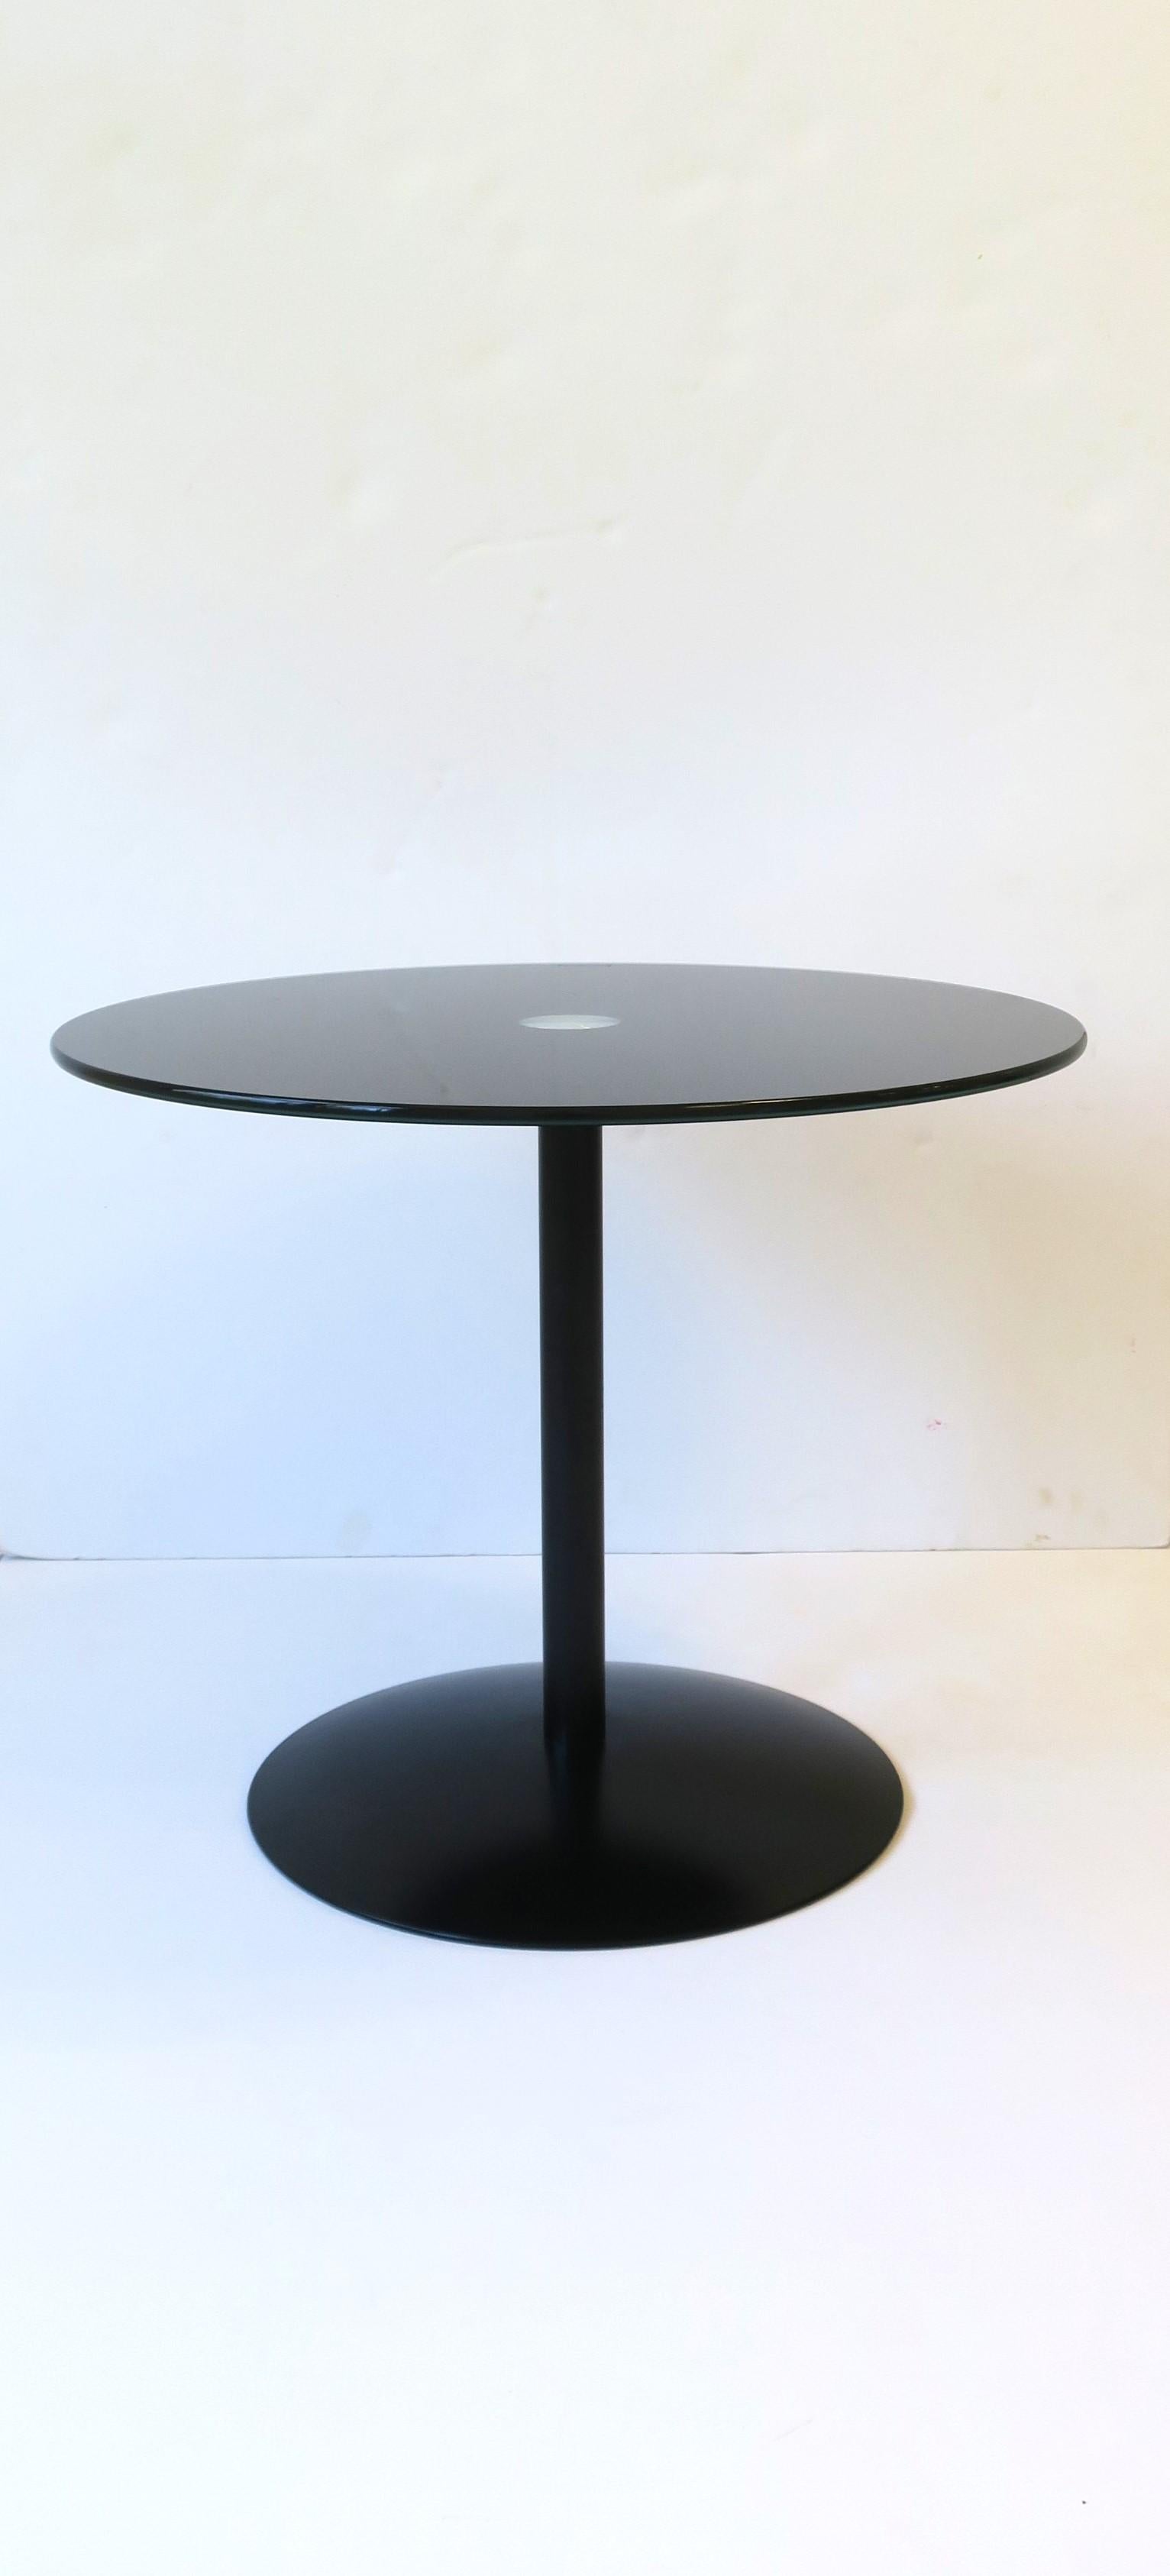 A beautiful and chic black glass and metal drinks side table in the Minimalist modern style, circa early 21st century. Table has a black glass top and metal base. Table's top resembles an LP record album with its jet-black color, circular shape, and